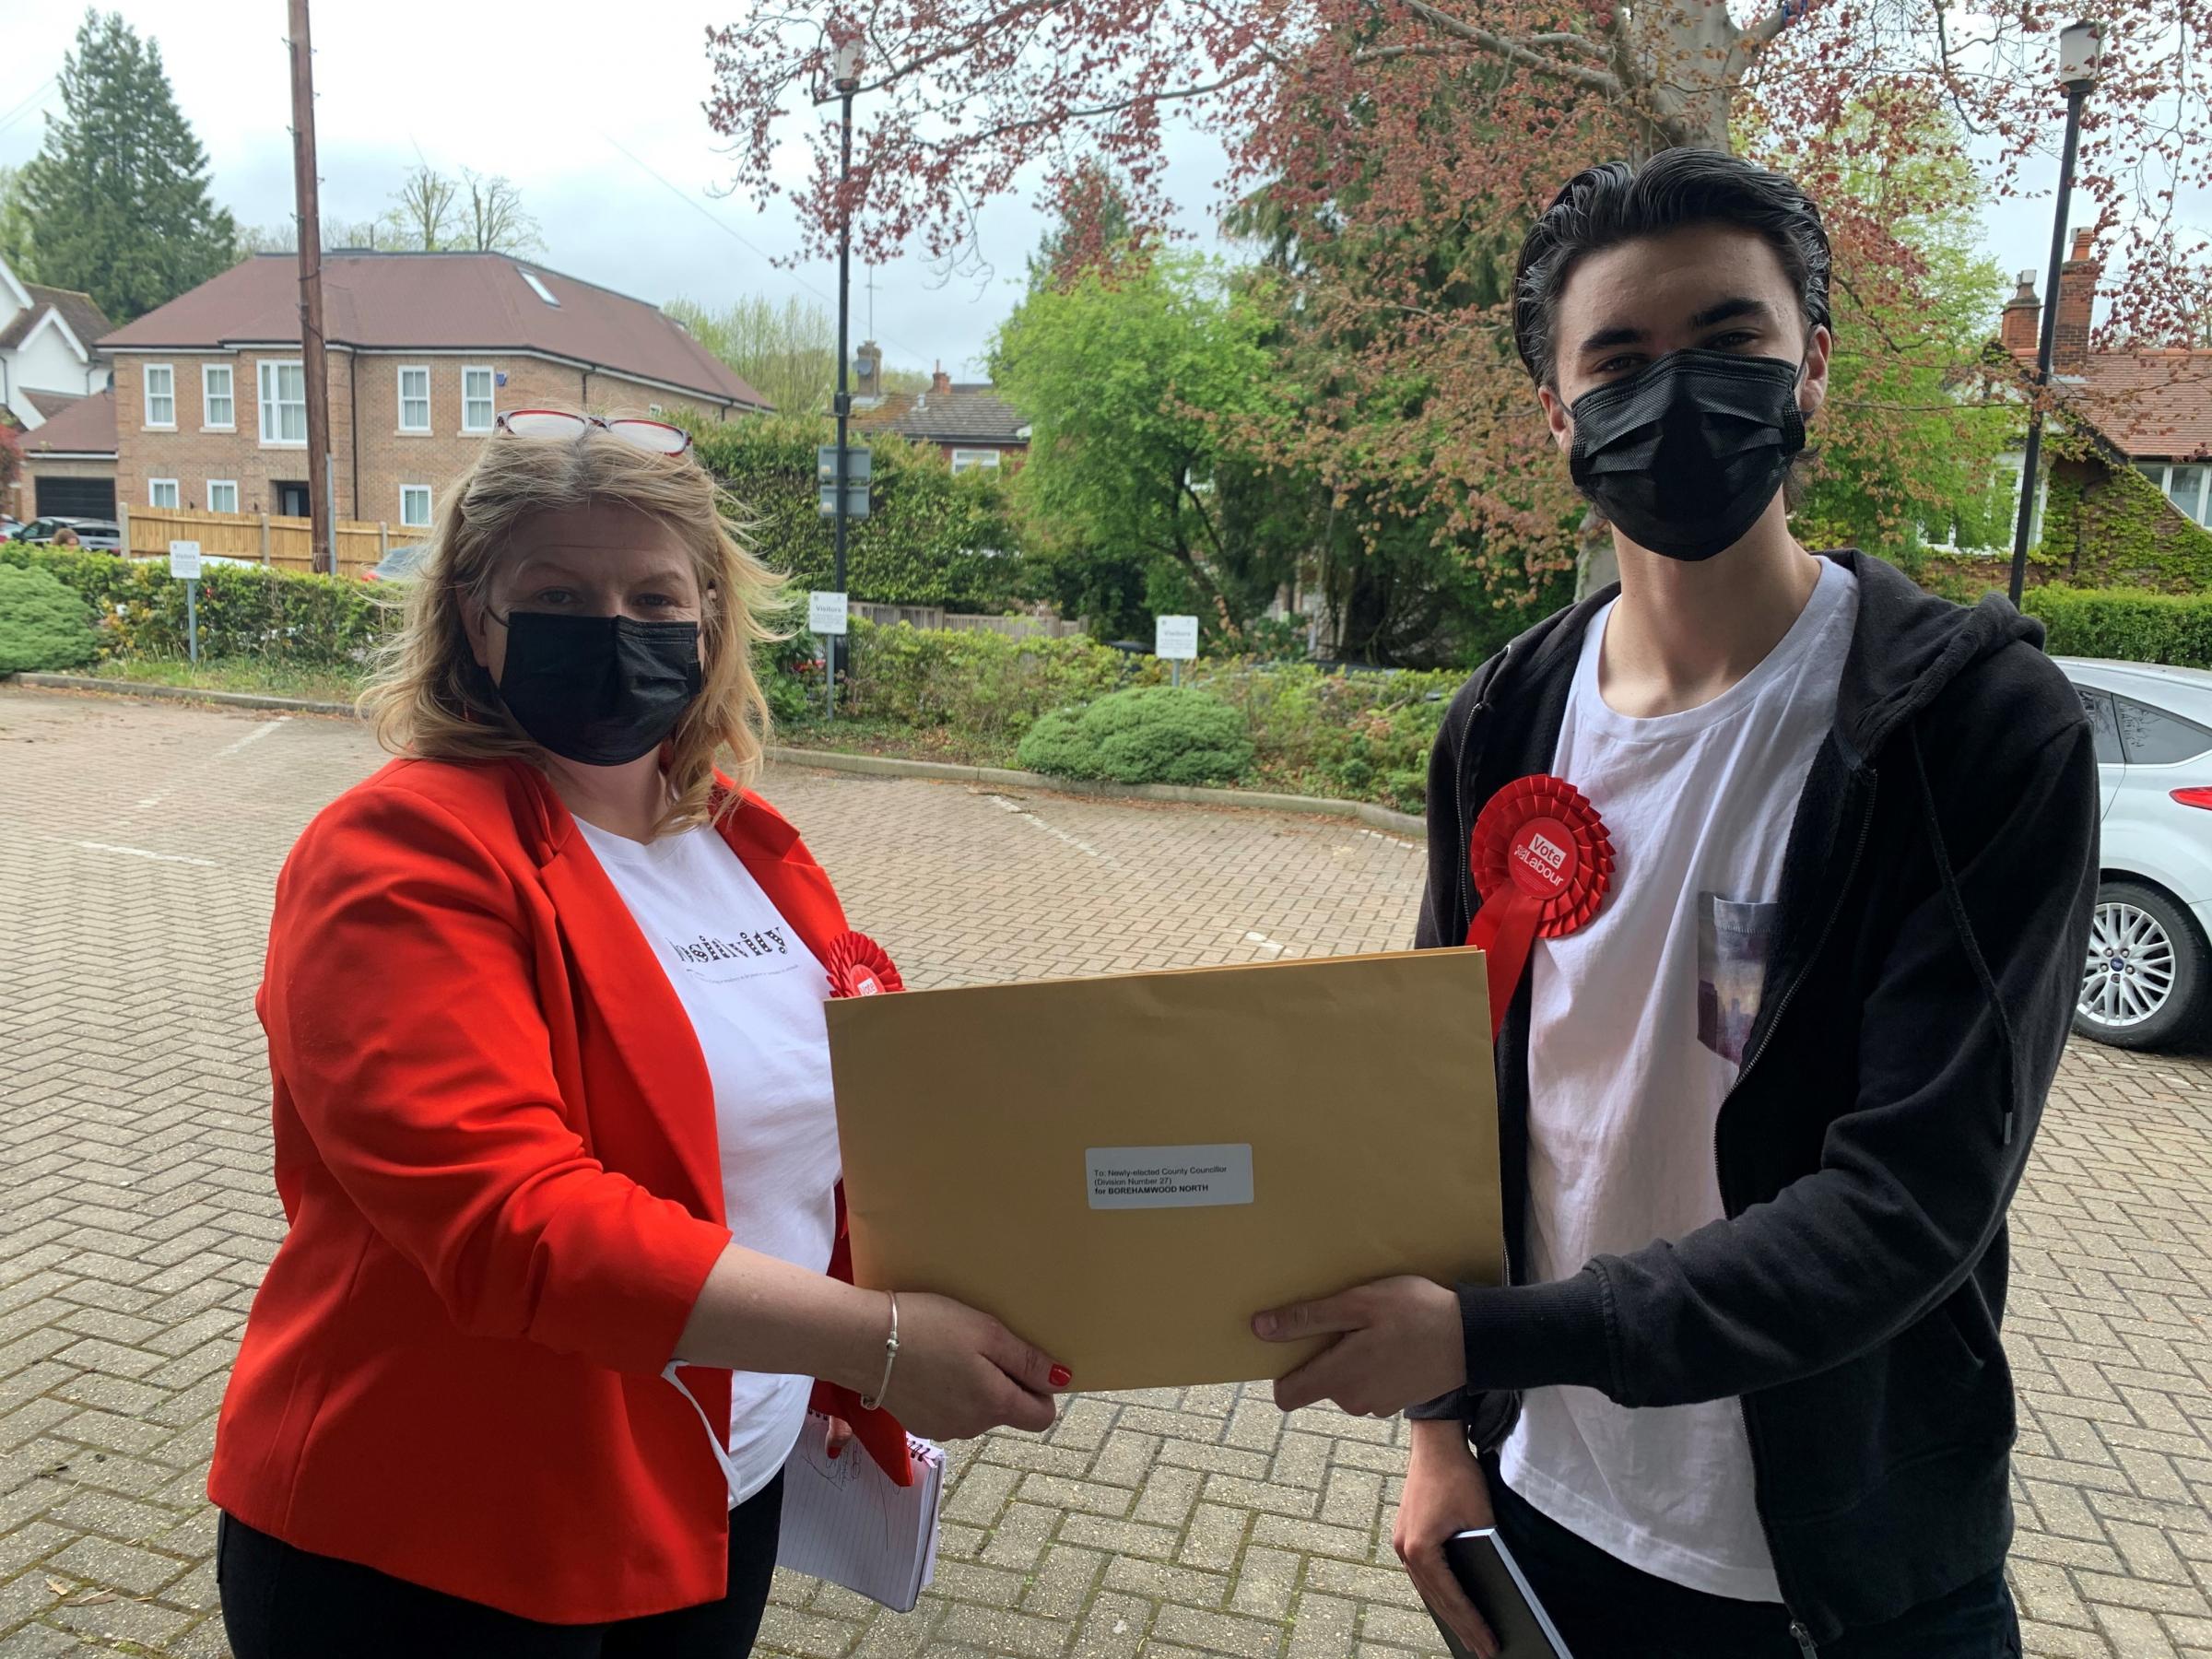 Cllr Michelle Vince pictured with Hertsmer Labour campaign manger Guy Bhana, 18.